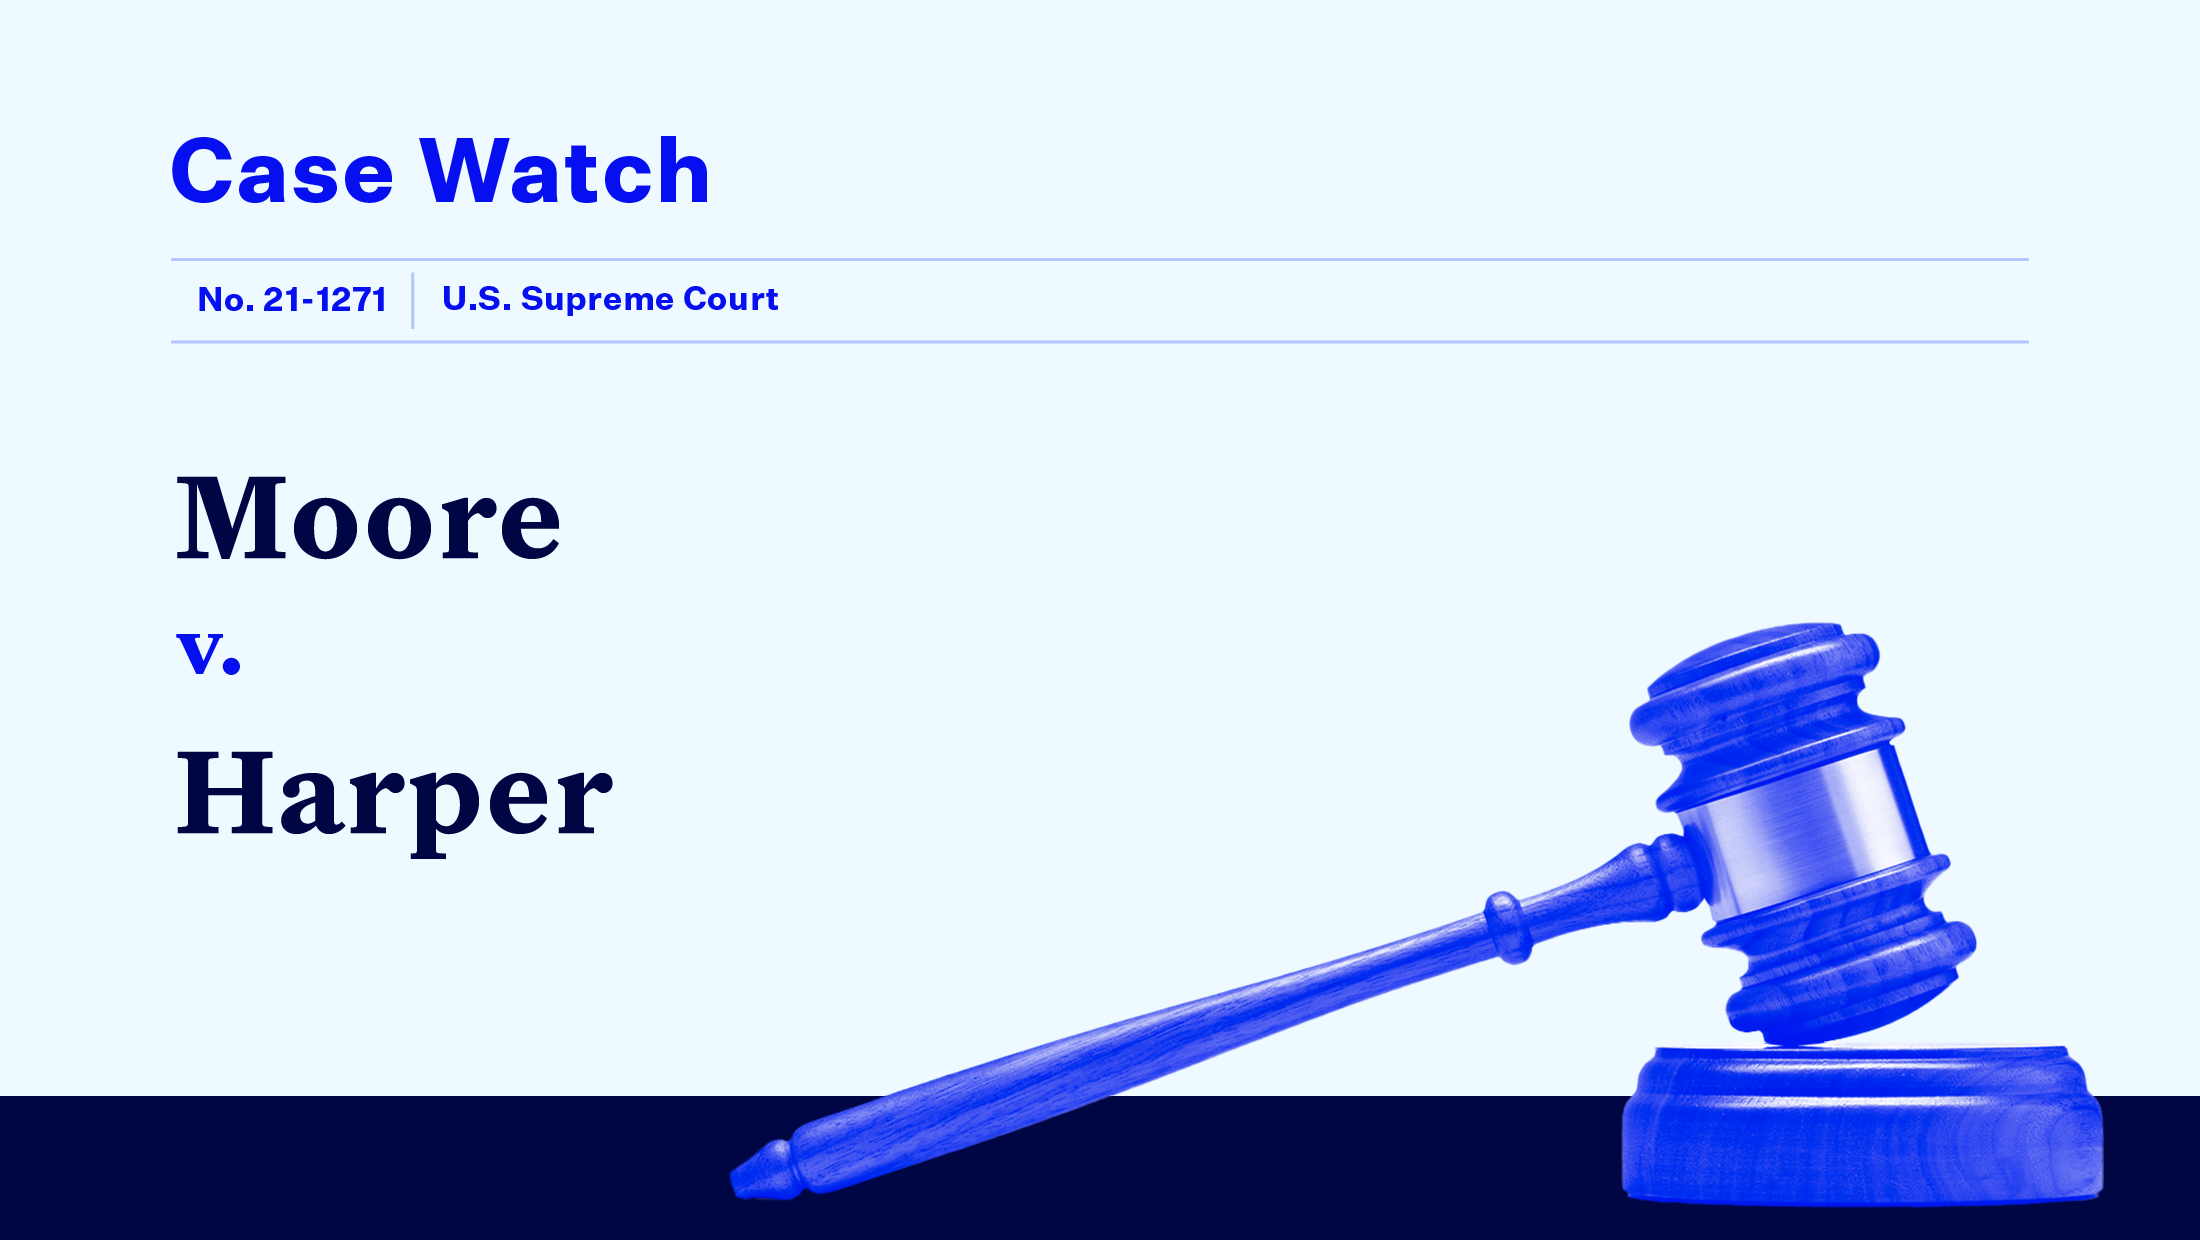 "CASE WATCH Moore v. Harper" and other case-specific text, including the file number and court name, with a blue-tinted gavel.